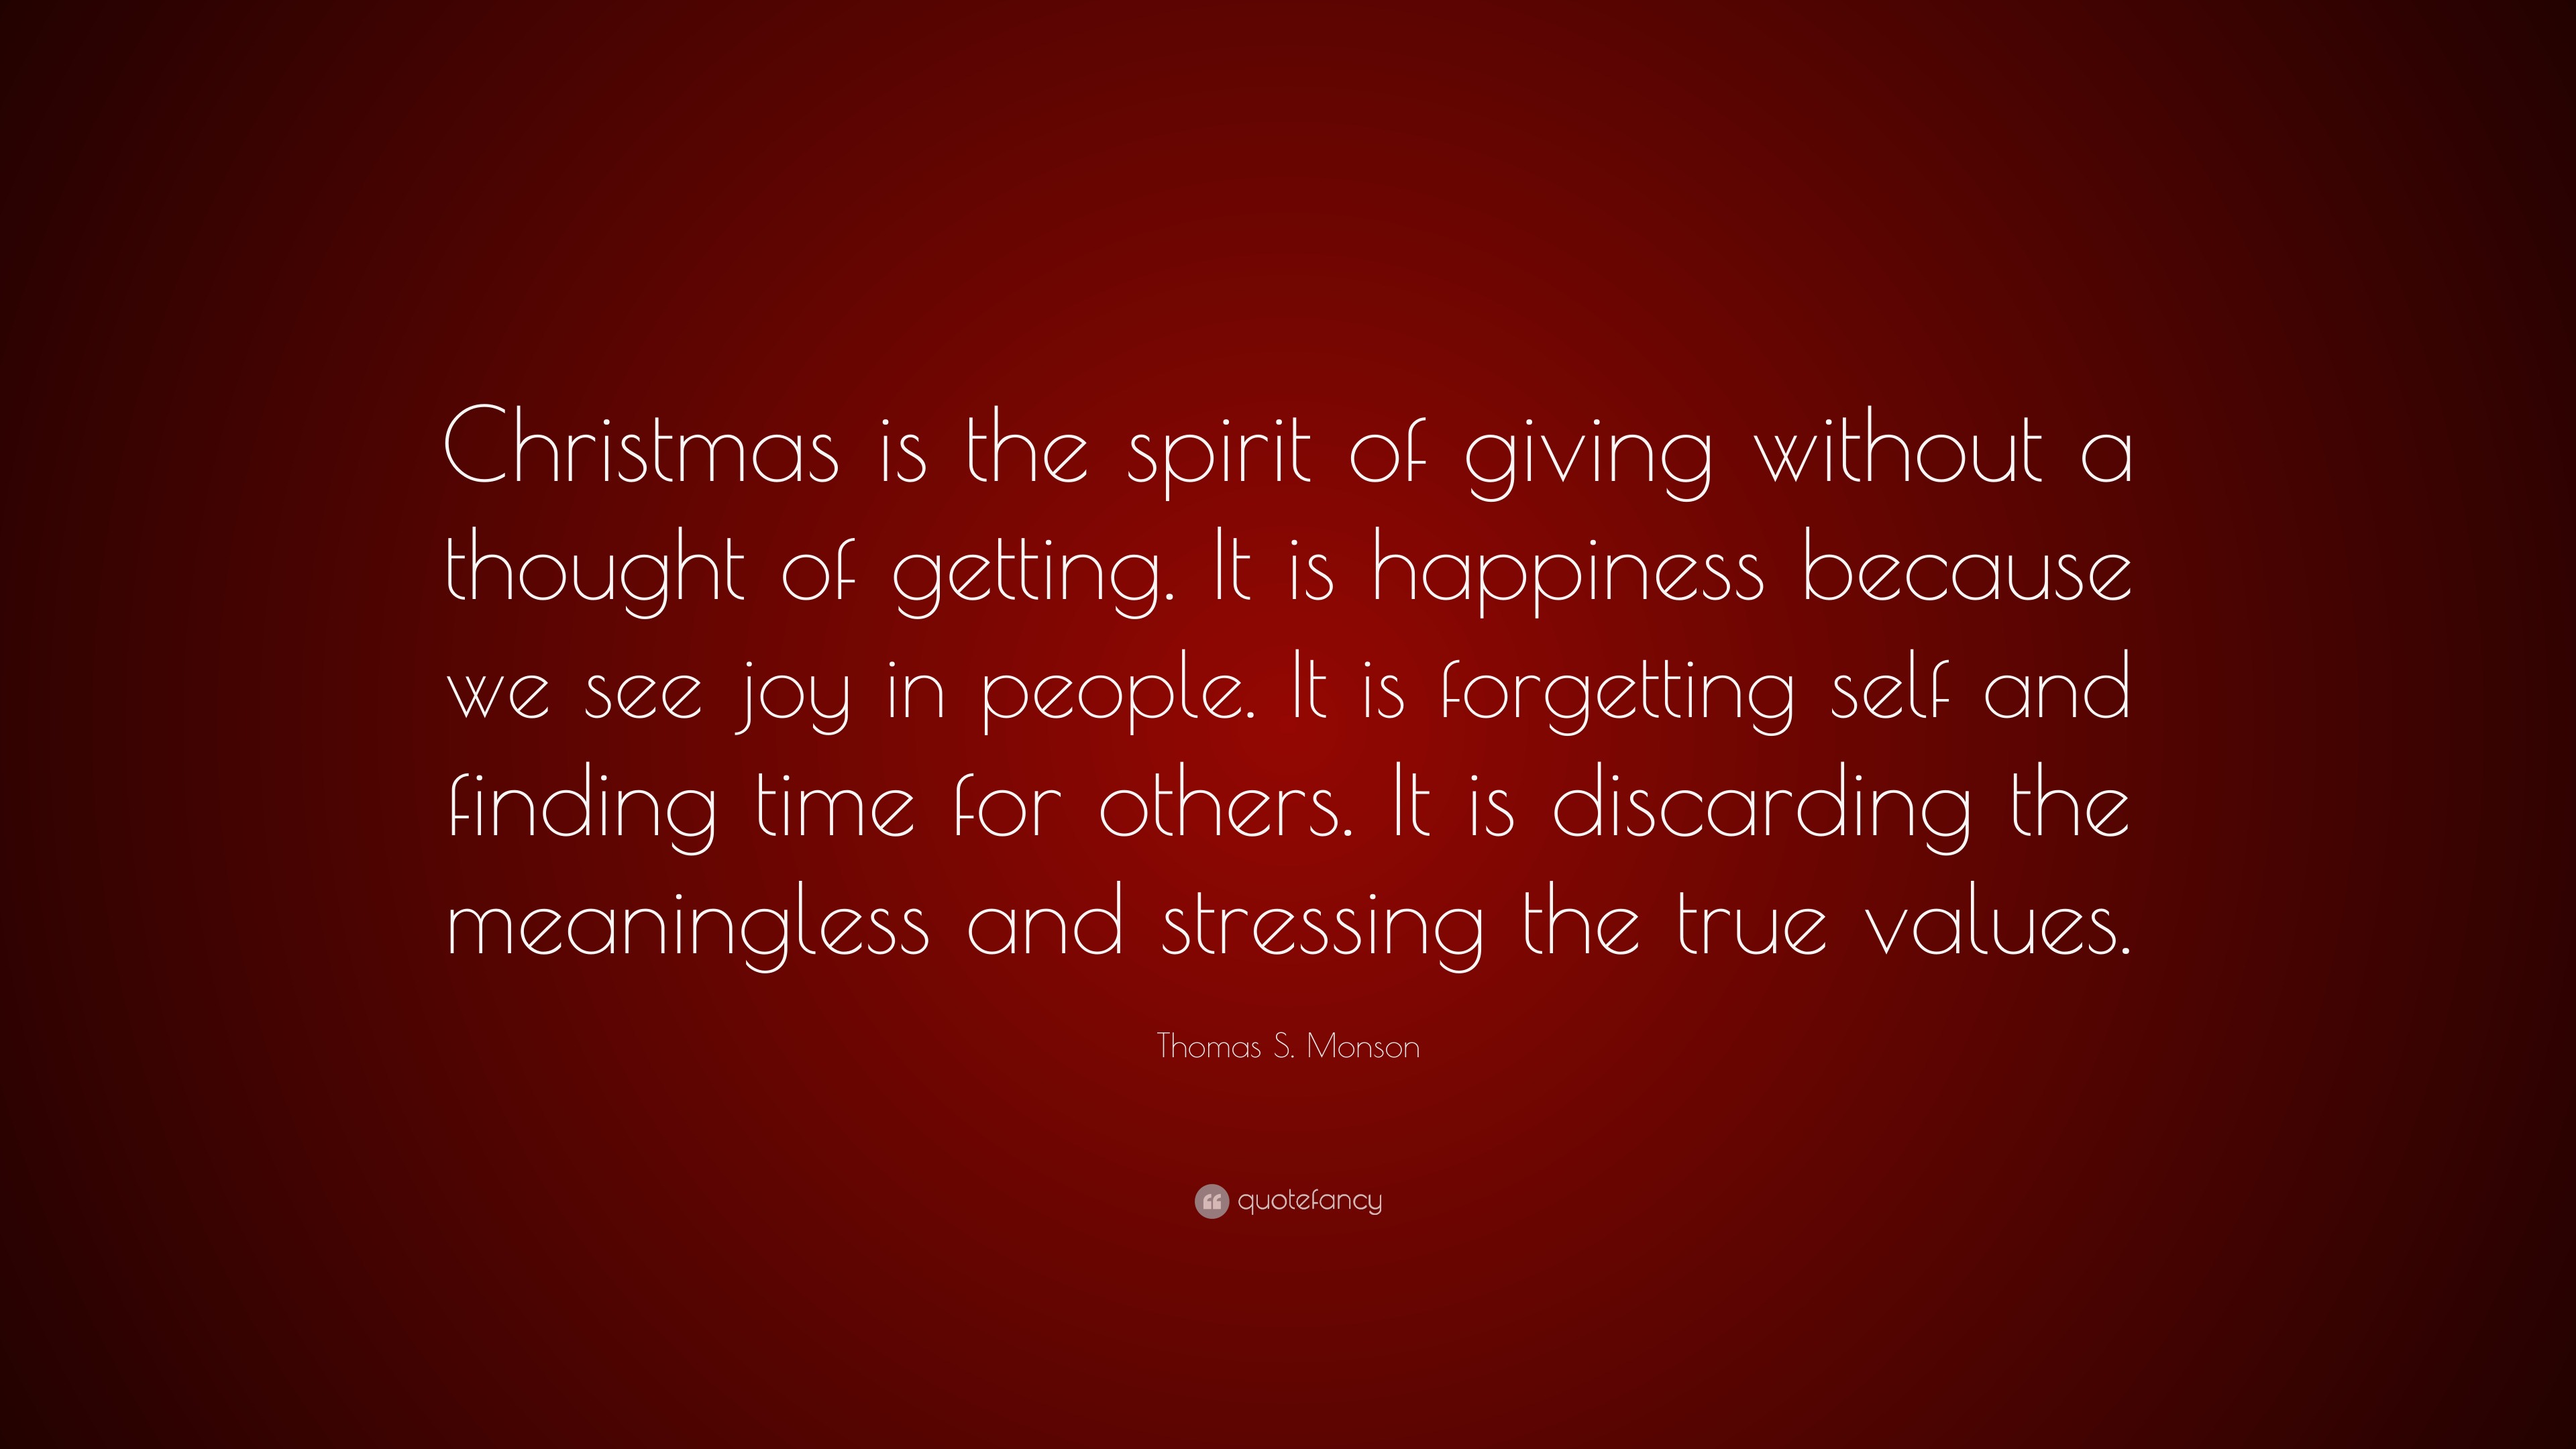 Thomas S. Monson Quote: “Christmas is the spirit of giving without a